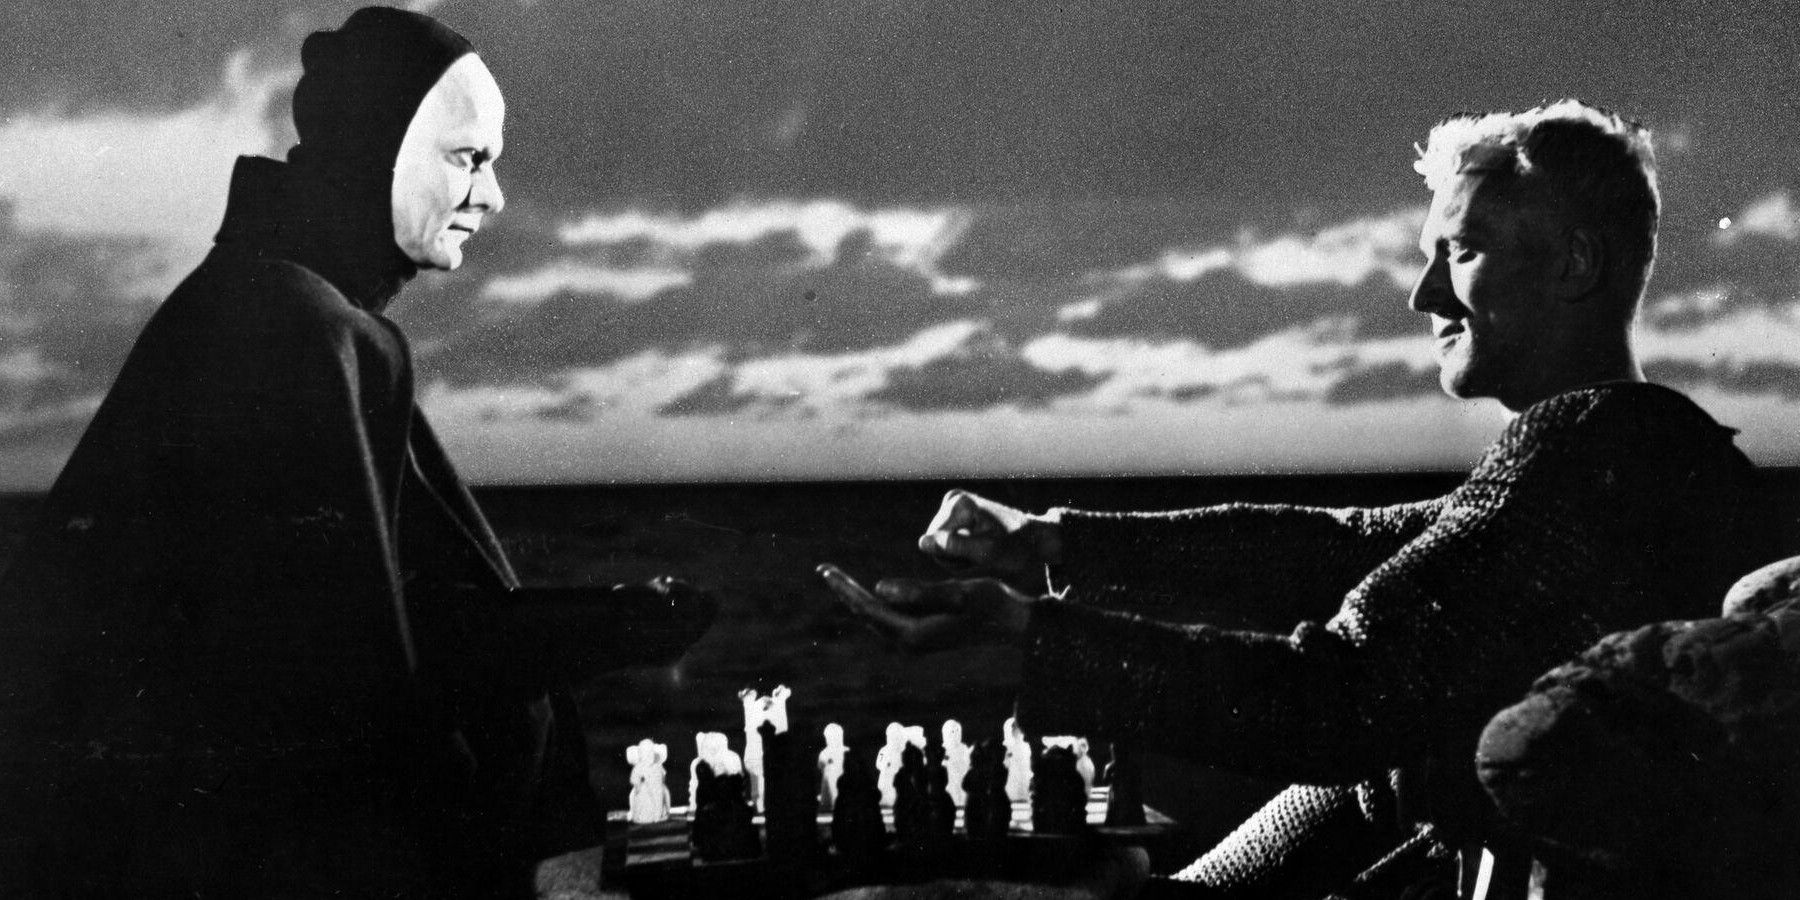 Max von Sydow plays chess with death in The Seventh Seal